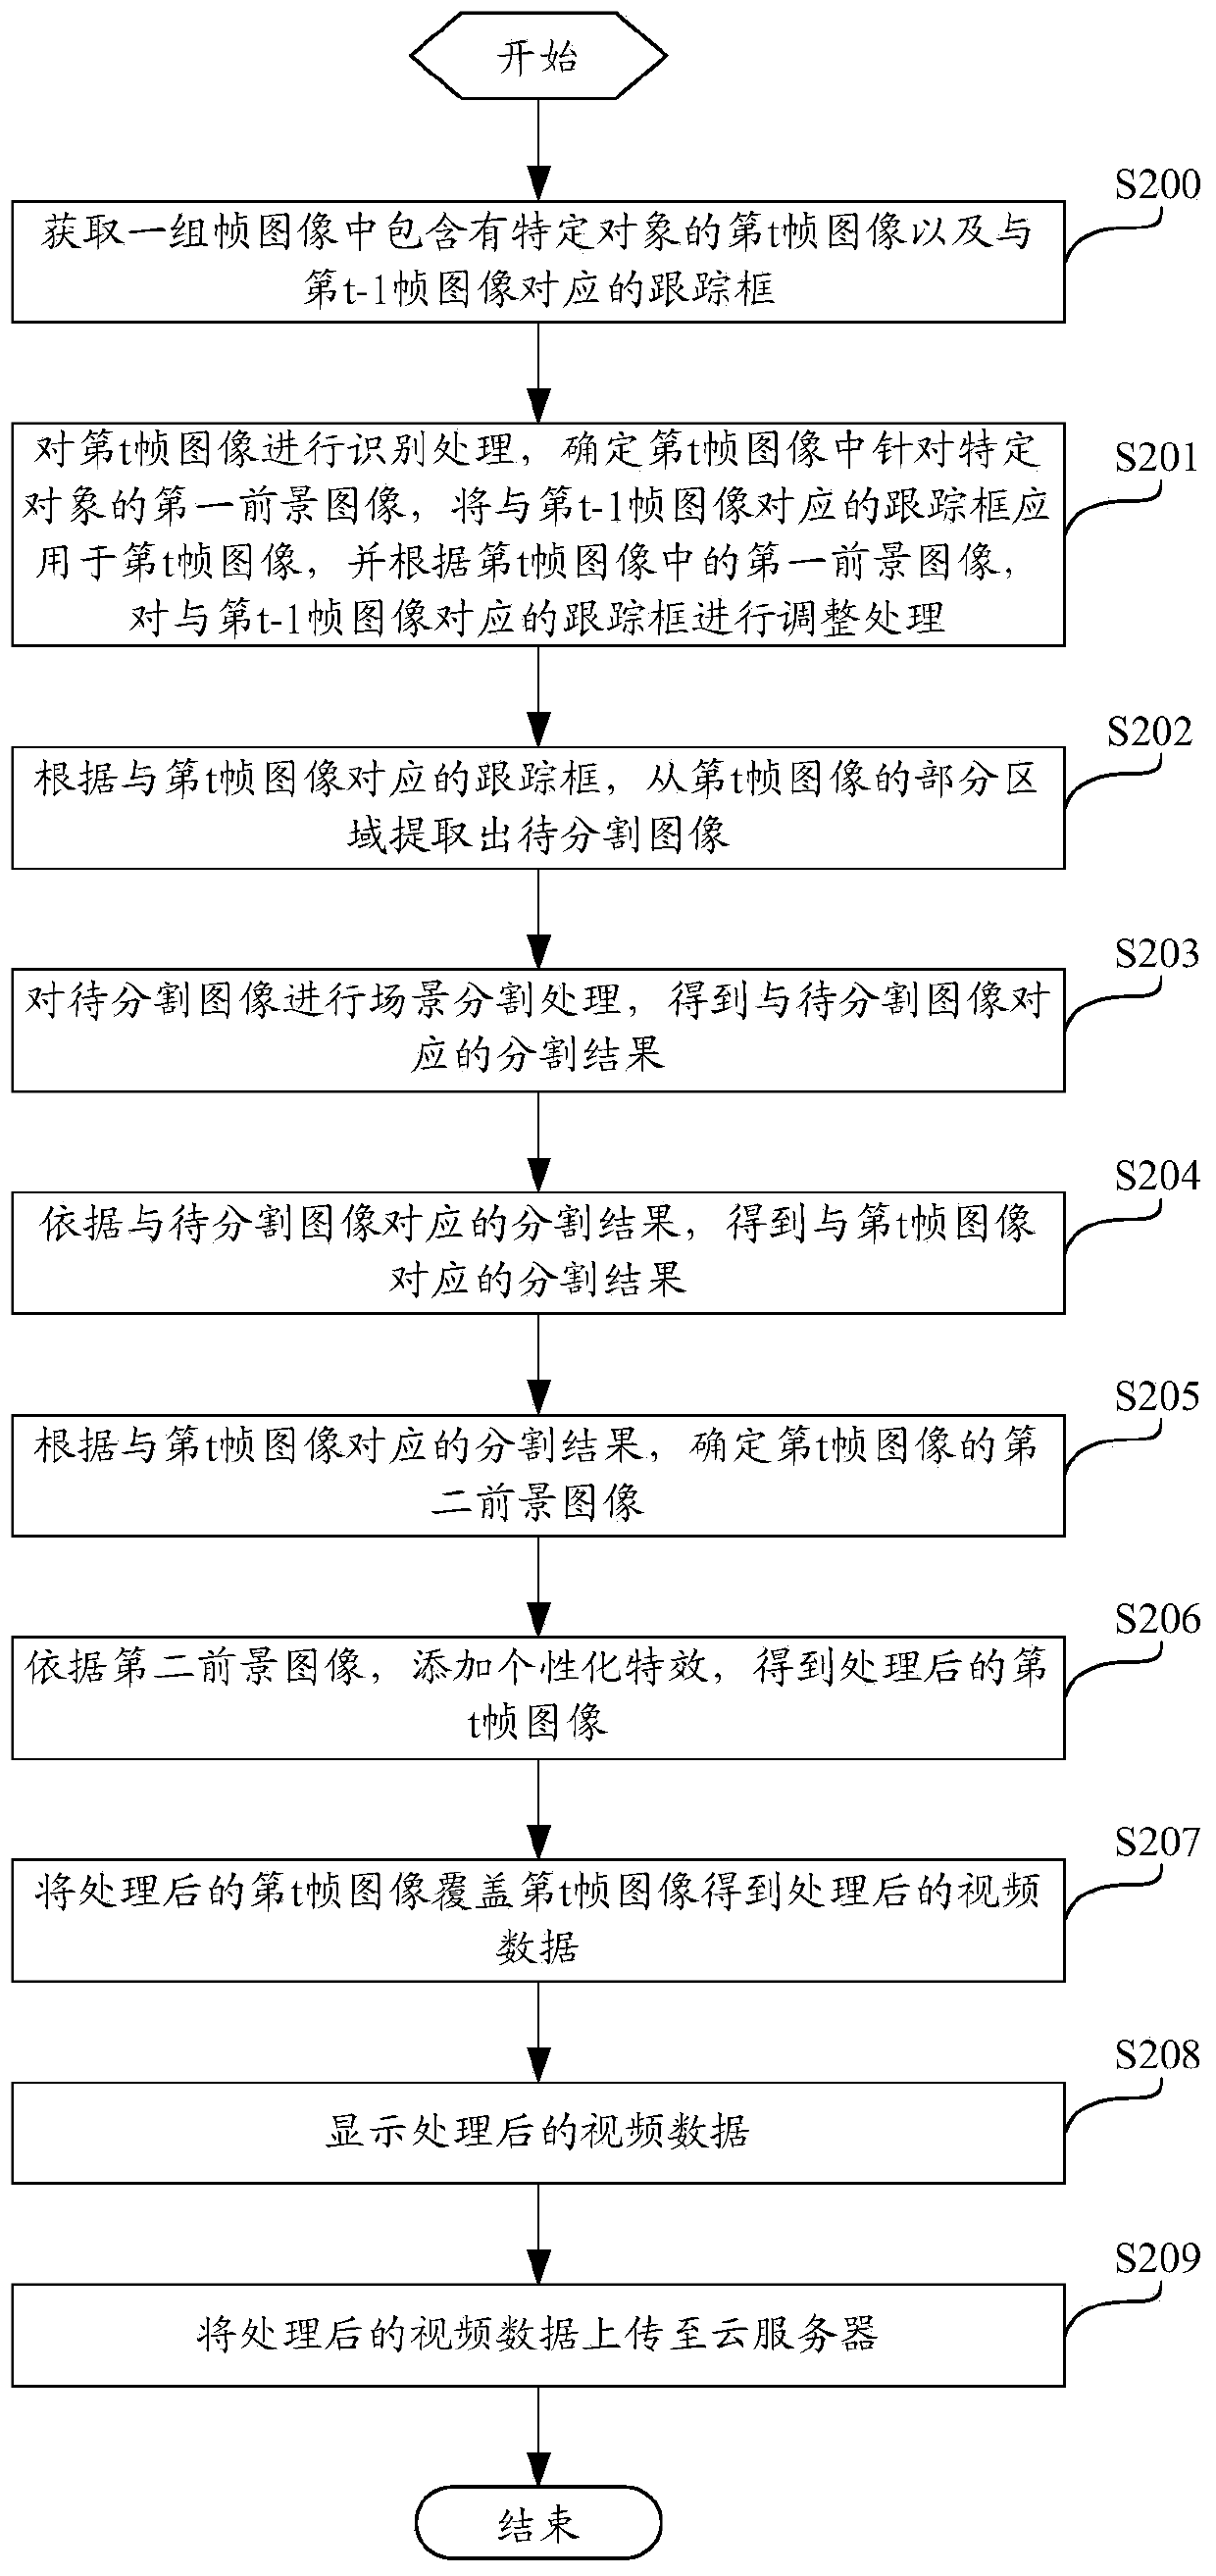 Video data real-time processing method and device based on adaptive tracking frame segmentation